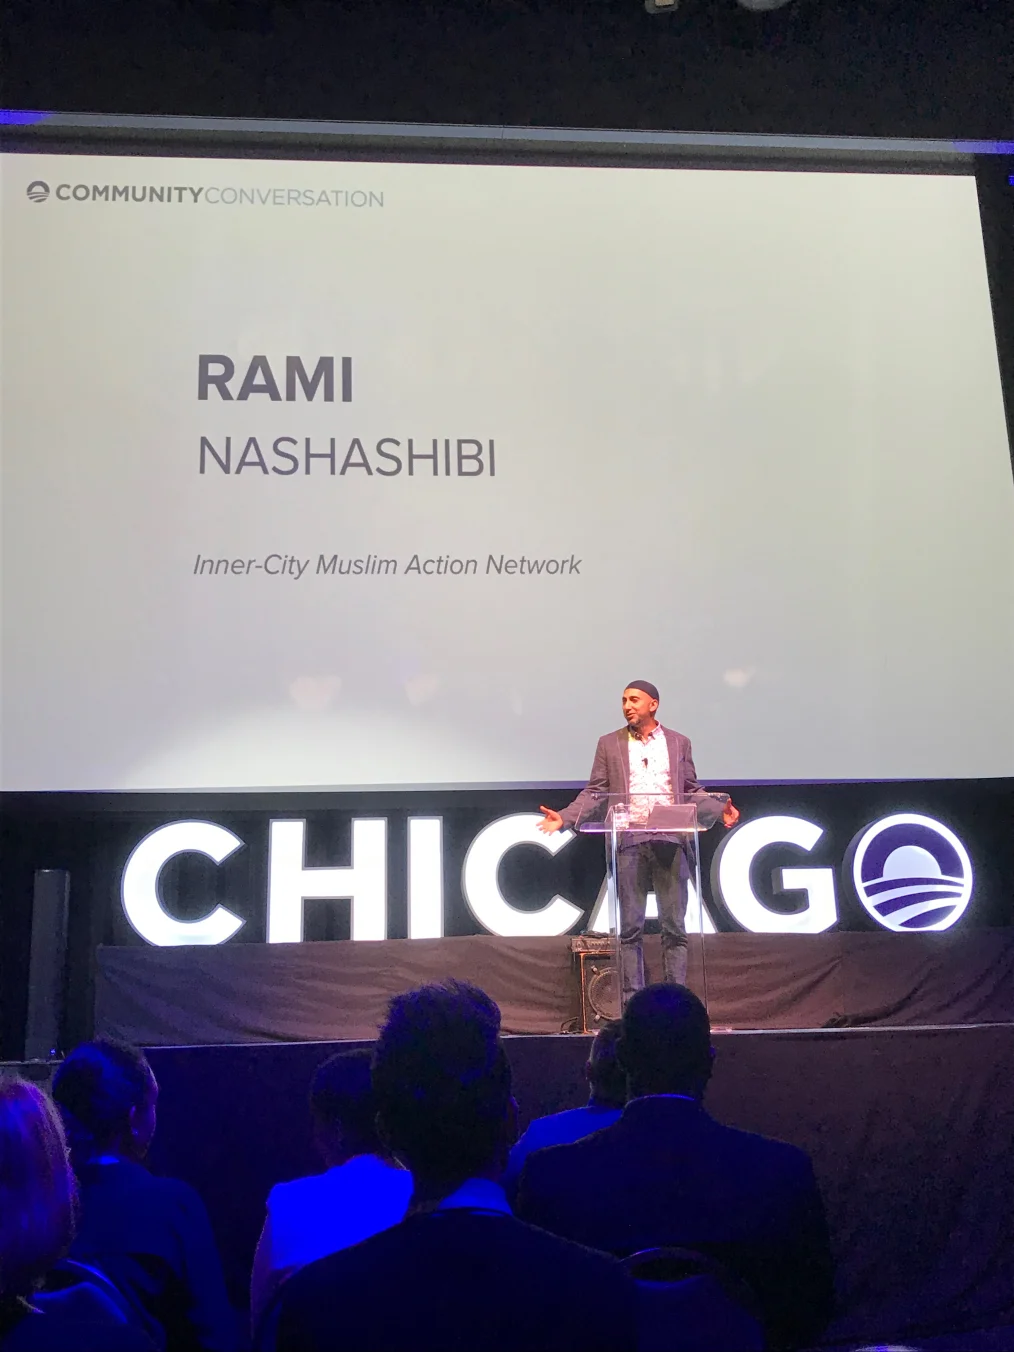 A man with a light medium skin tone dressed in business attire stands on stage in front of a clear podium. Behind him is a large white screen with text that reads "Community Conversation" and below it, the text reads "Rami Nashashibi" and "Inner-City Mulsim Action Network" 